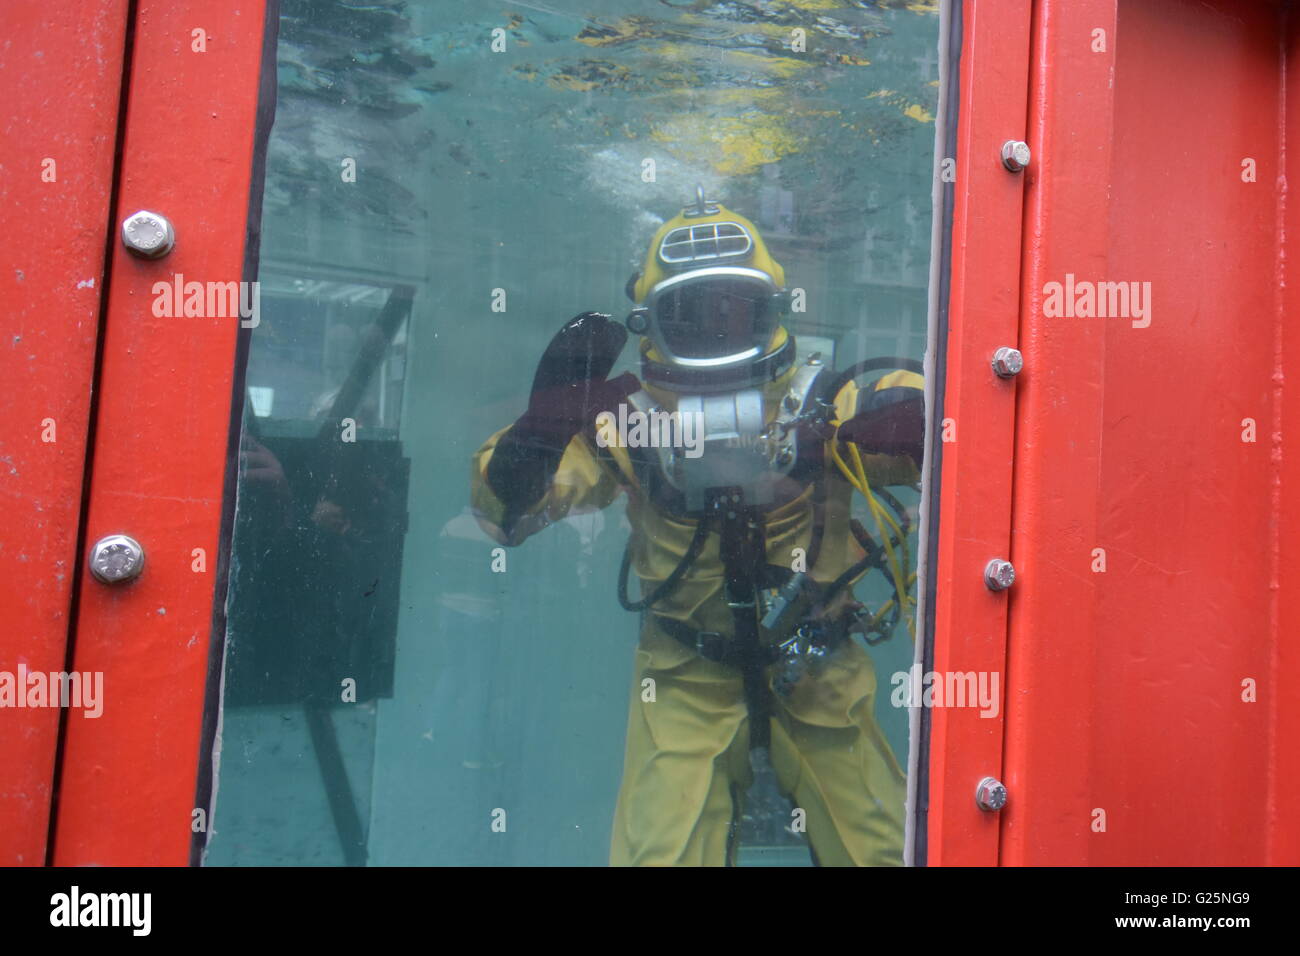 diver in a container with water Stock Photo